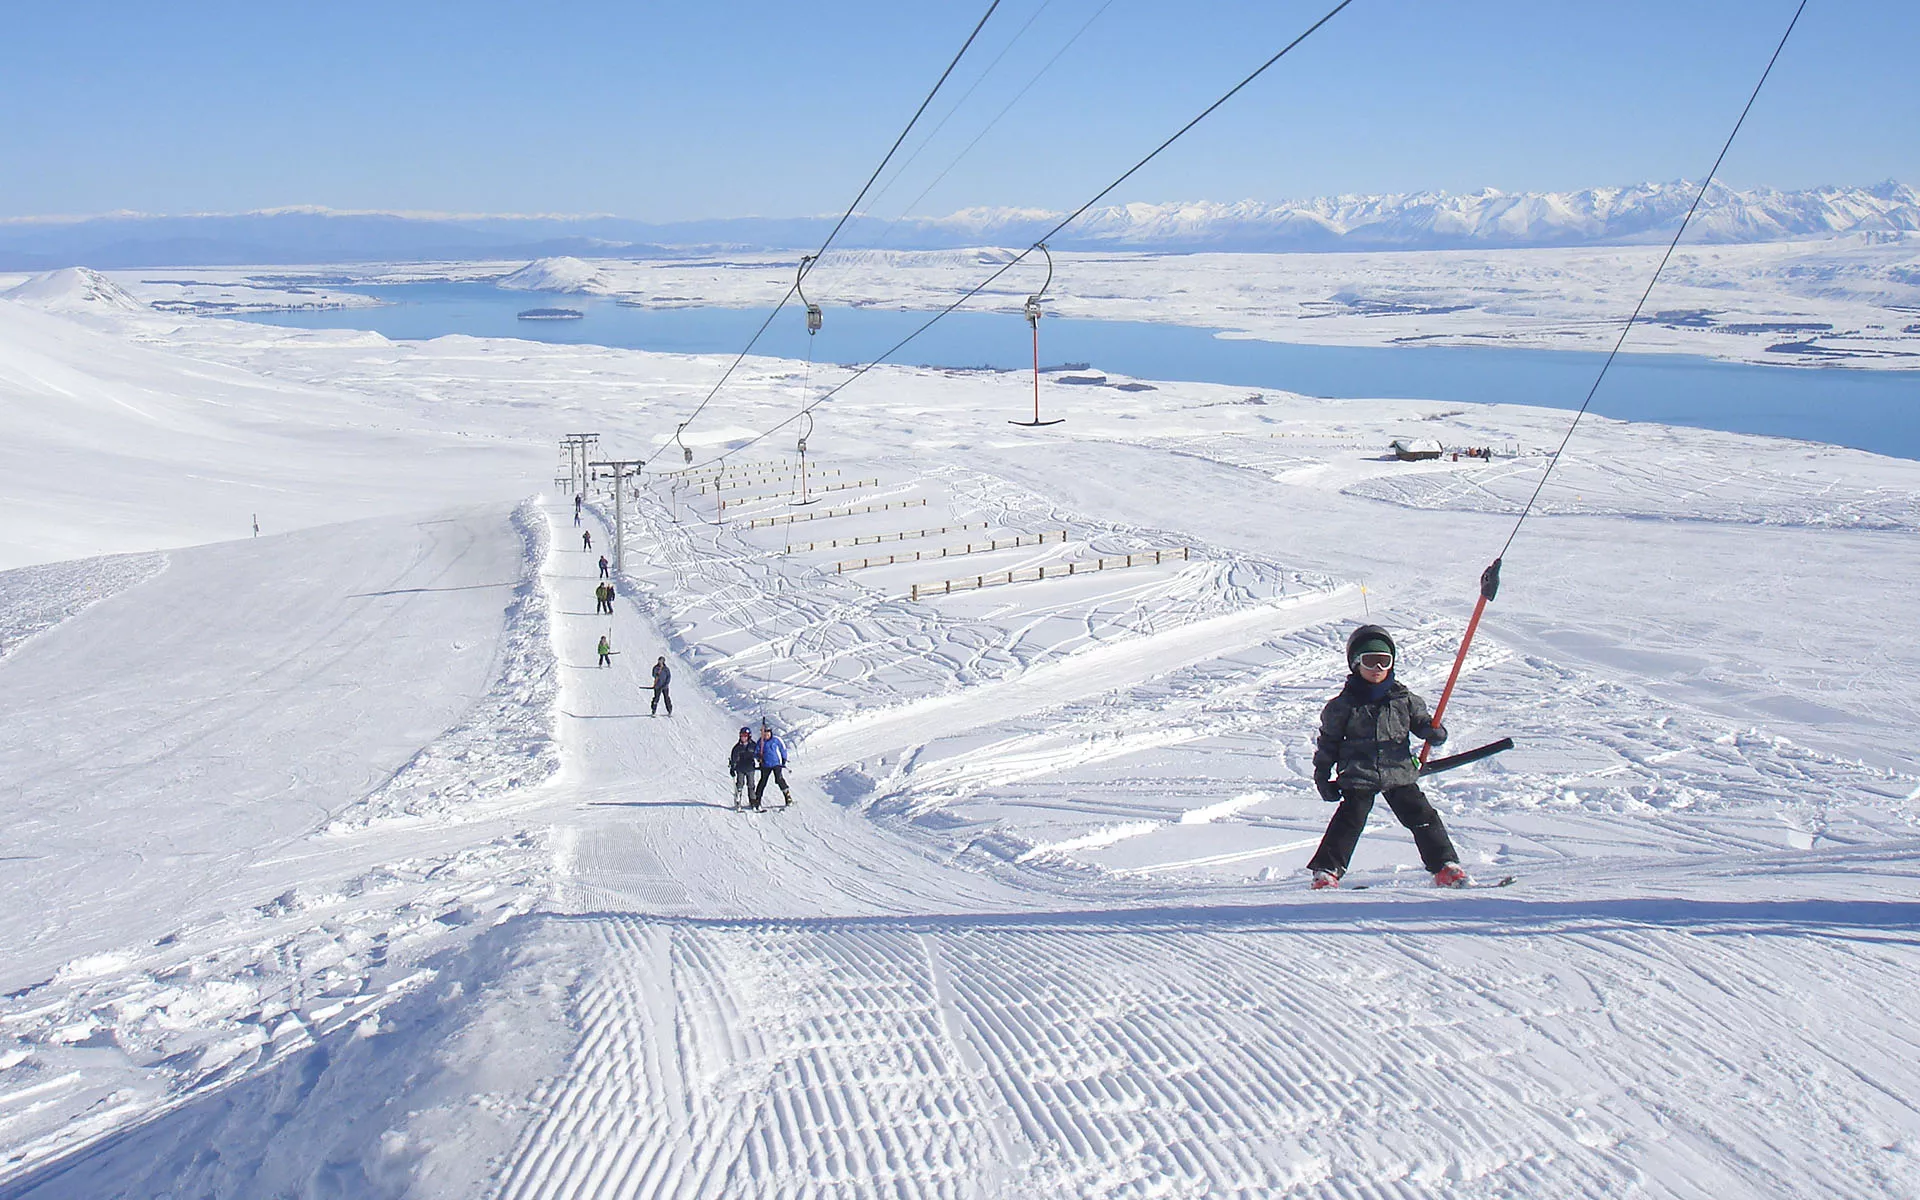 Roundhill Ski Area in New Zealand, Australia and Oceania | Snowboarding,Skiing - Rated 0.8